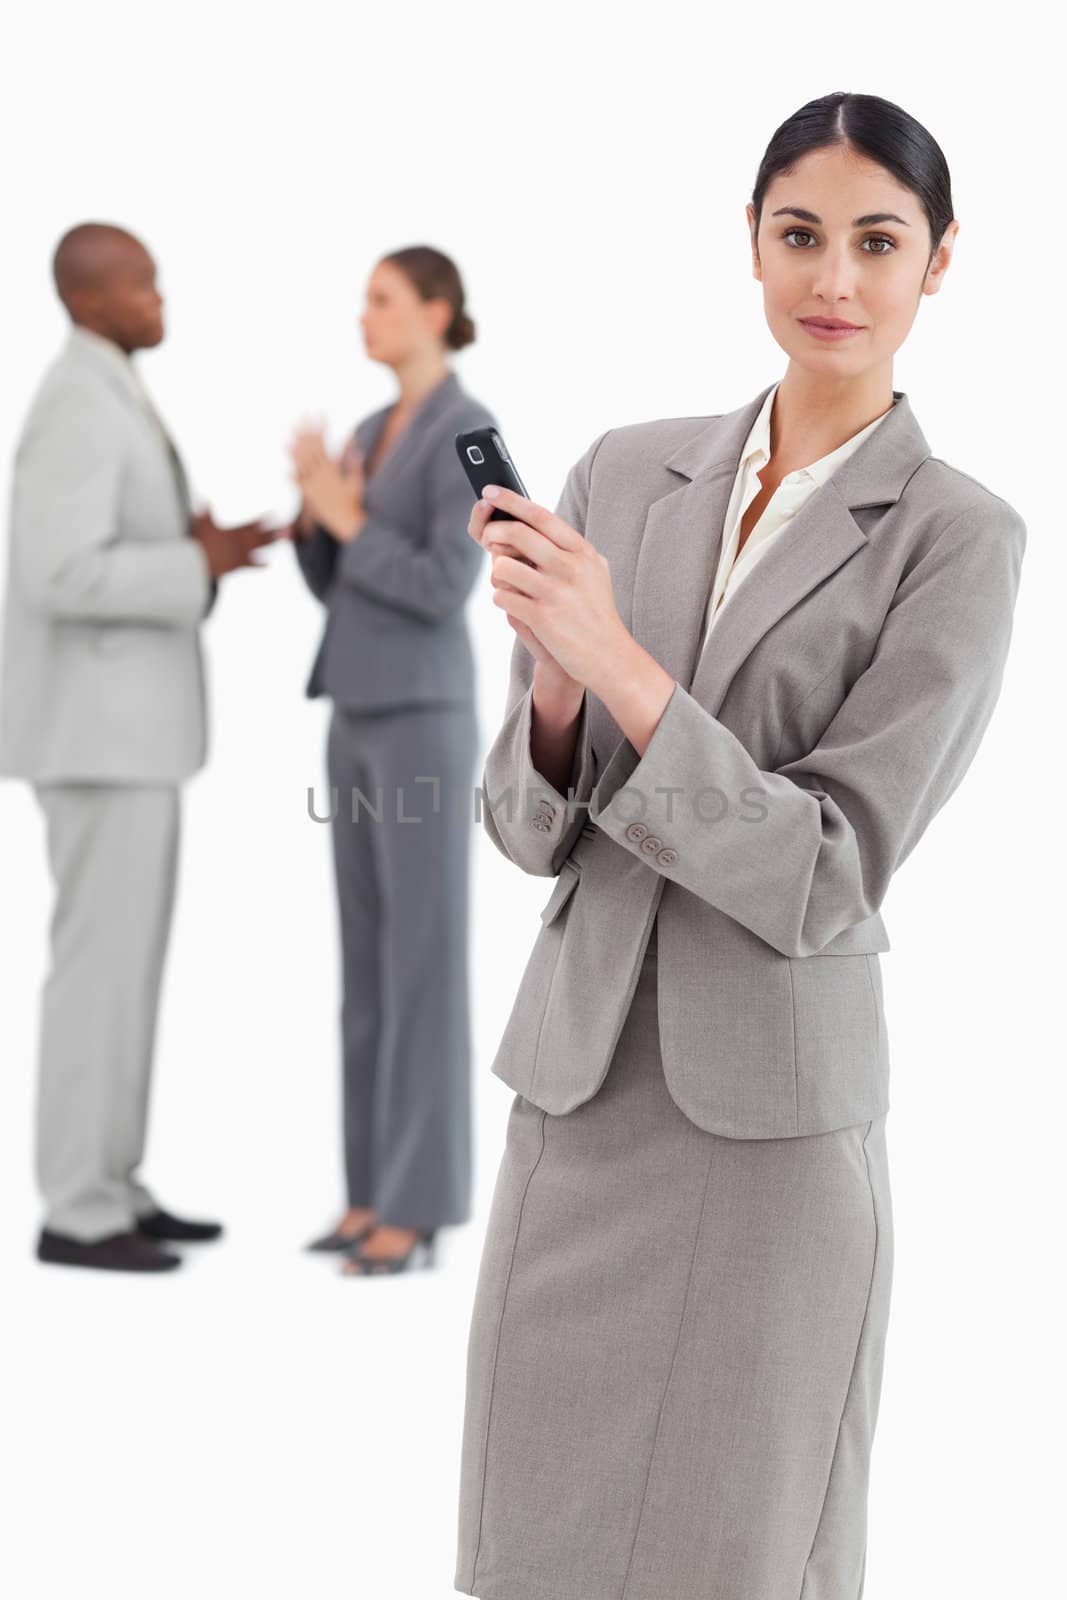 Saleswoman holding cellphone and colleagues behind her against a white background